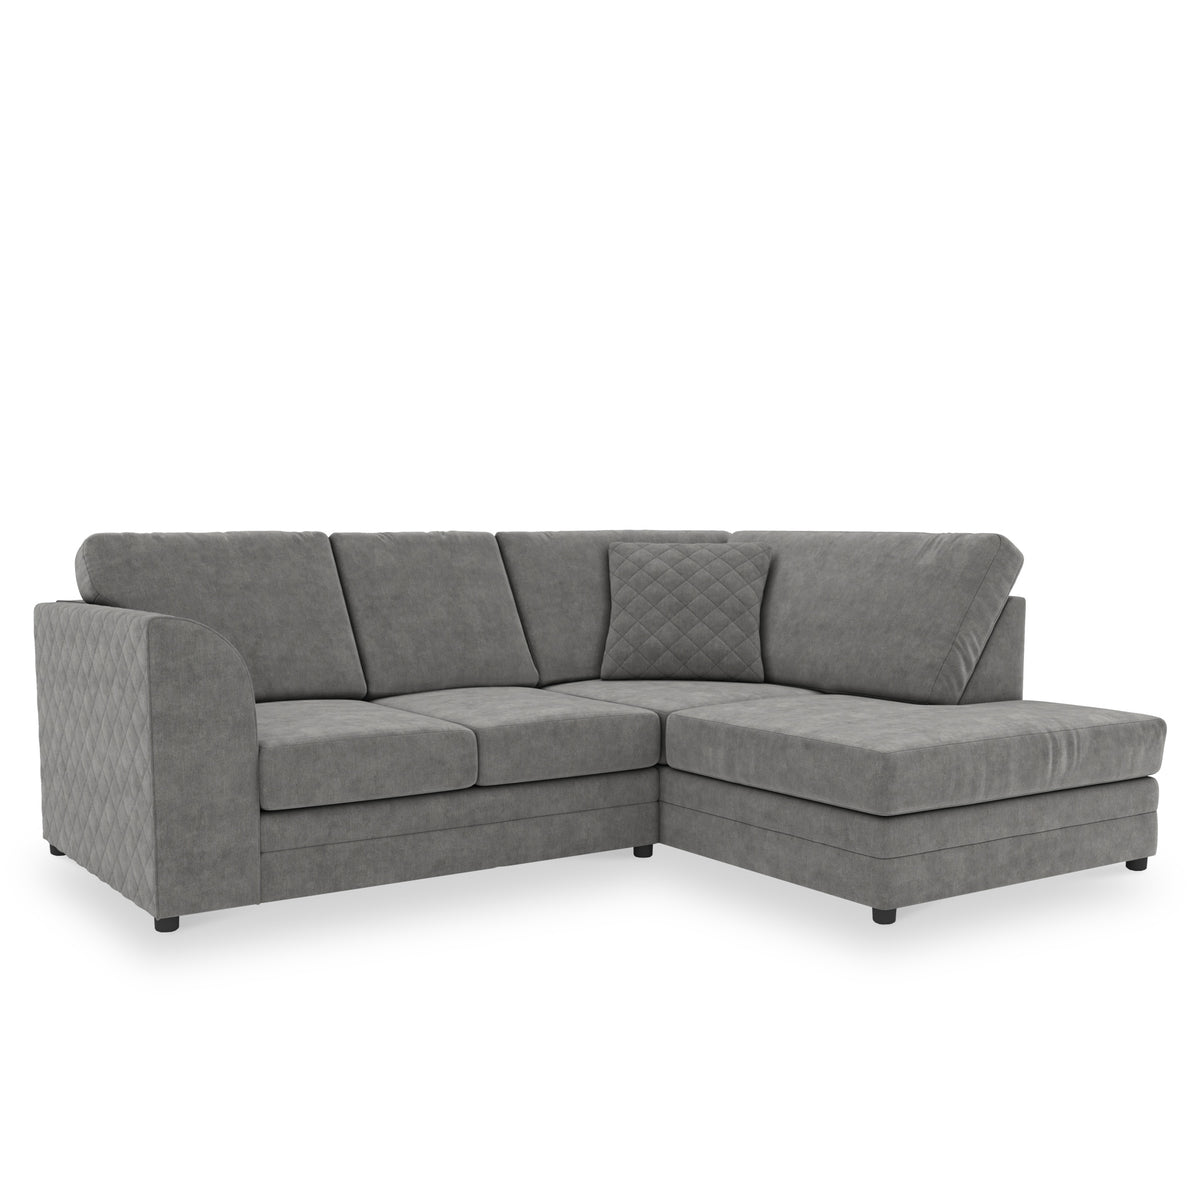 Seymour Charcoal Right Hand Corner Sofa from Roseland Furniture